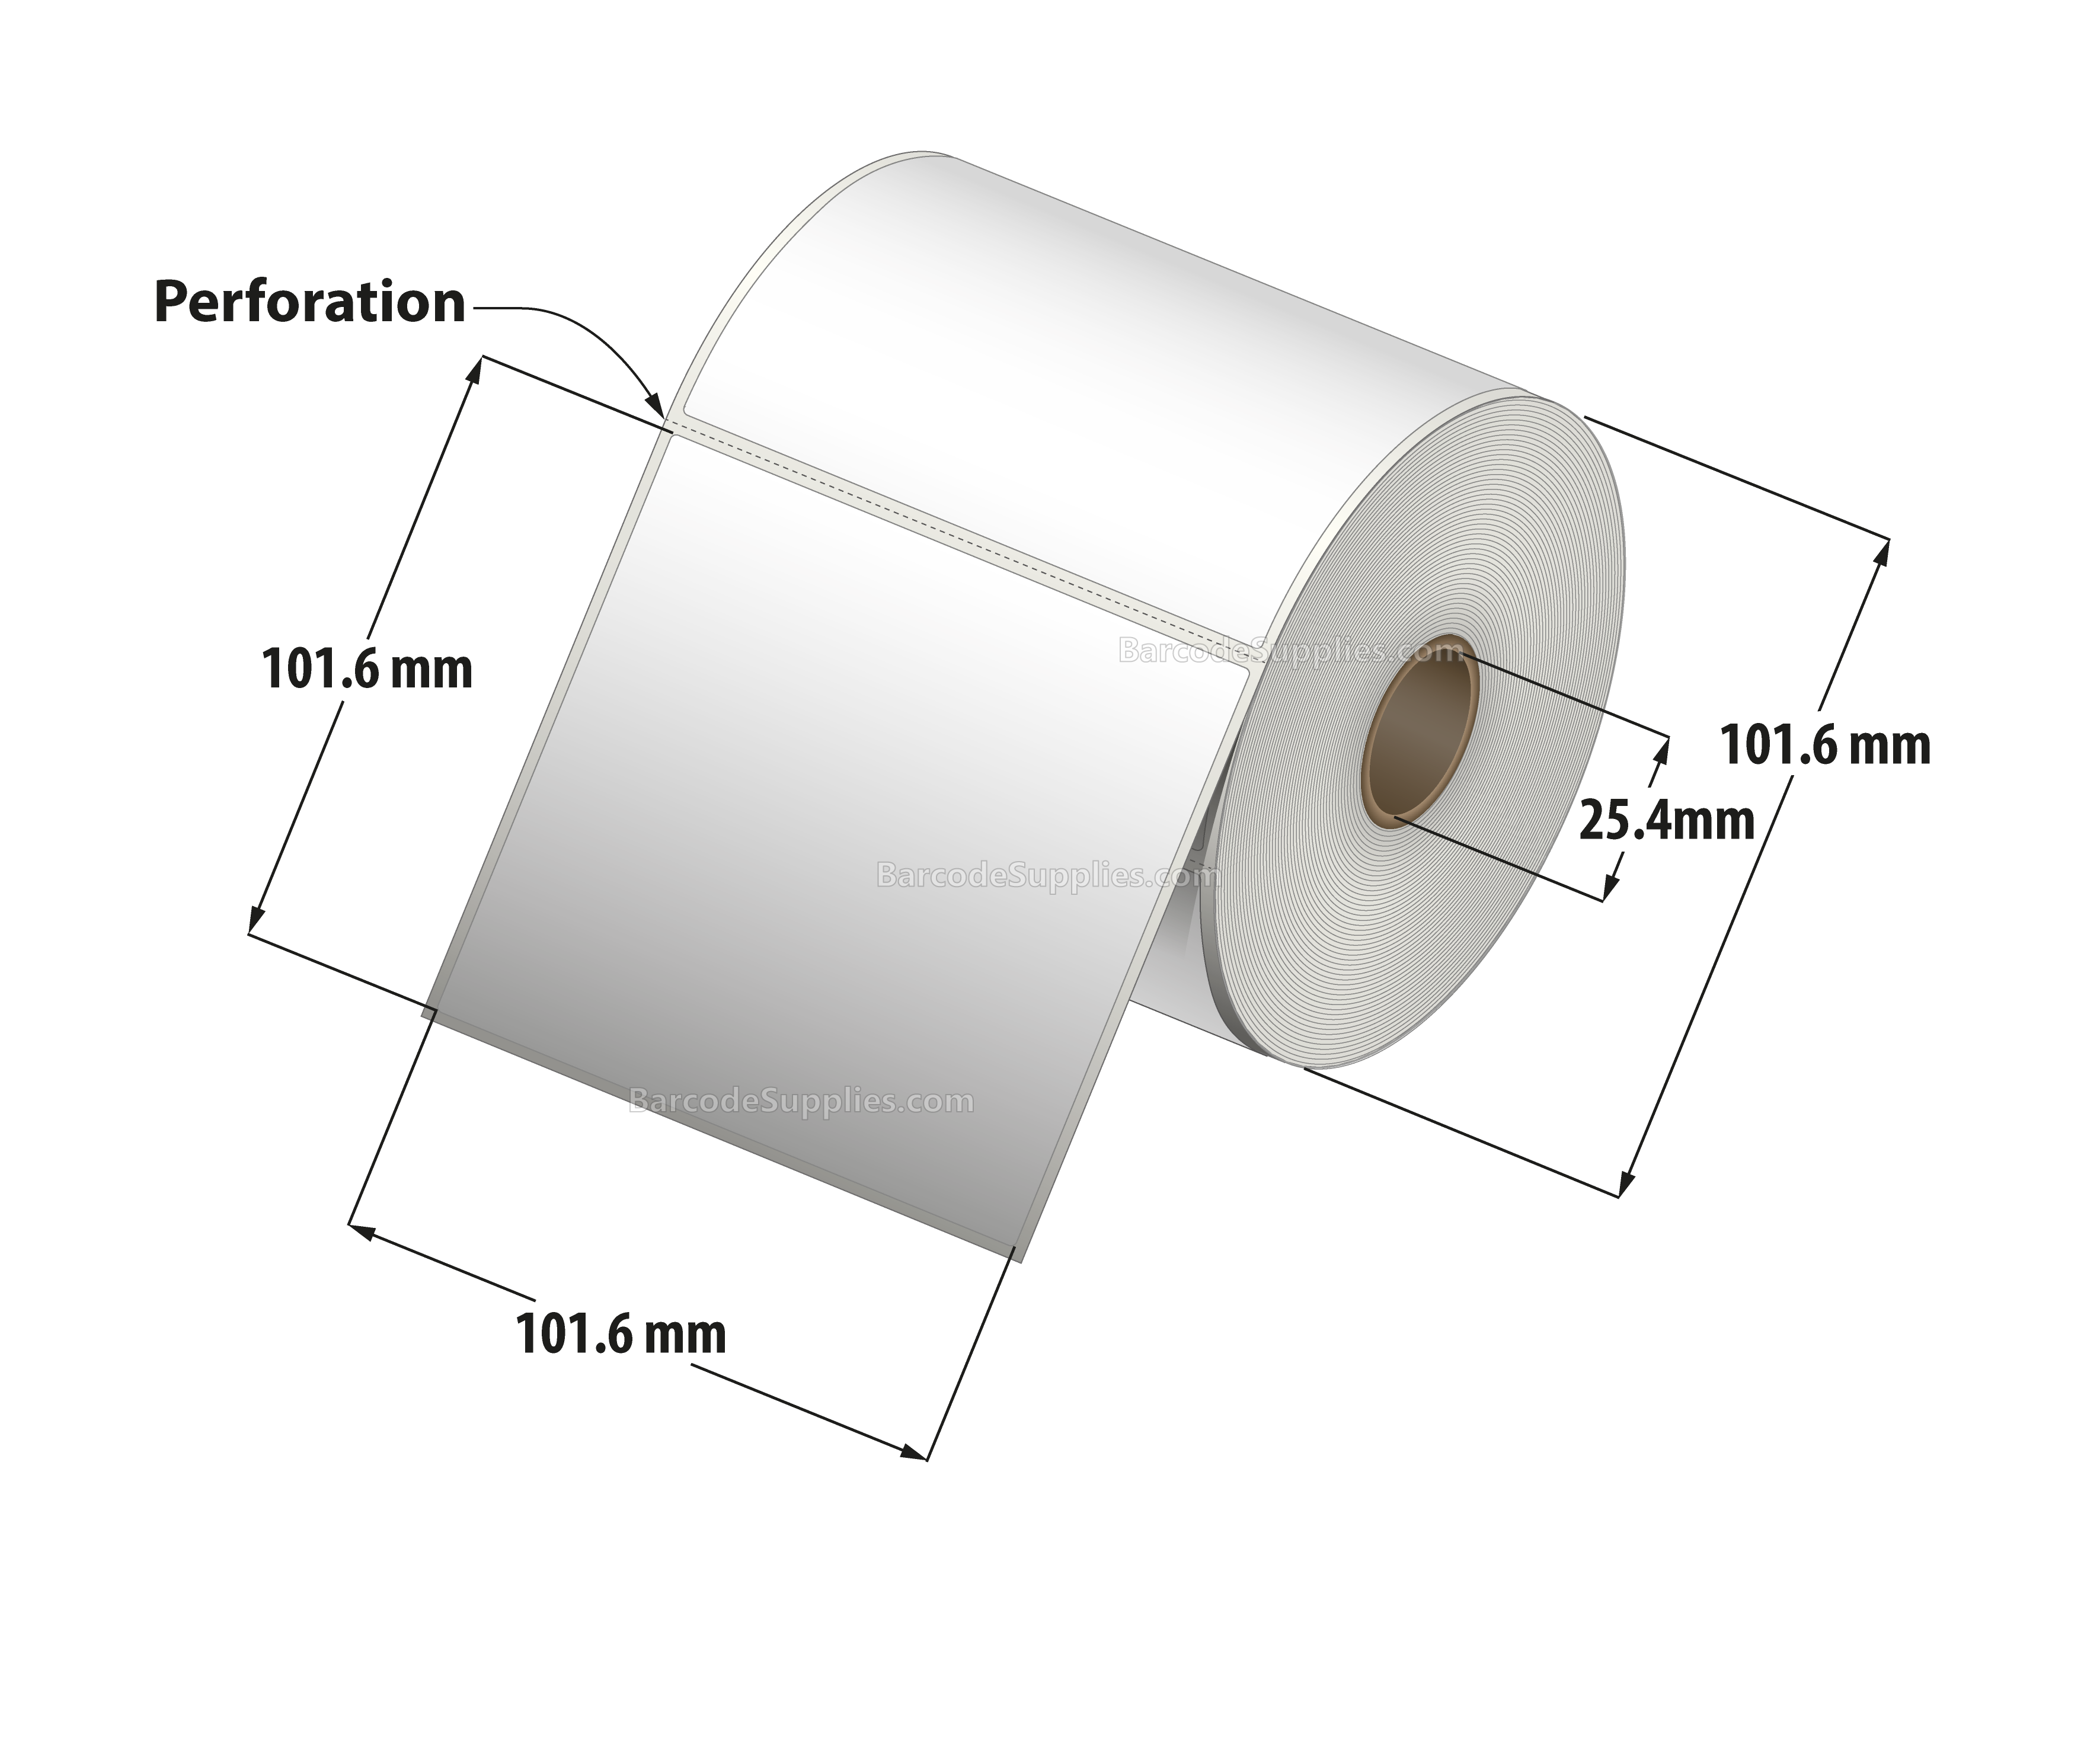 4 x 4 Thermal Transfer White Labels With Permanent Adhesive - Perforated - 380 Labels Per Roll - Carton Of 12 Rolls - 4560 Labels Total - MPN: RT-4-4-380-1 - BarcodeSource, Inc.